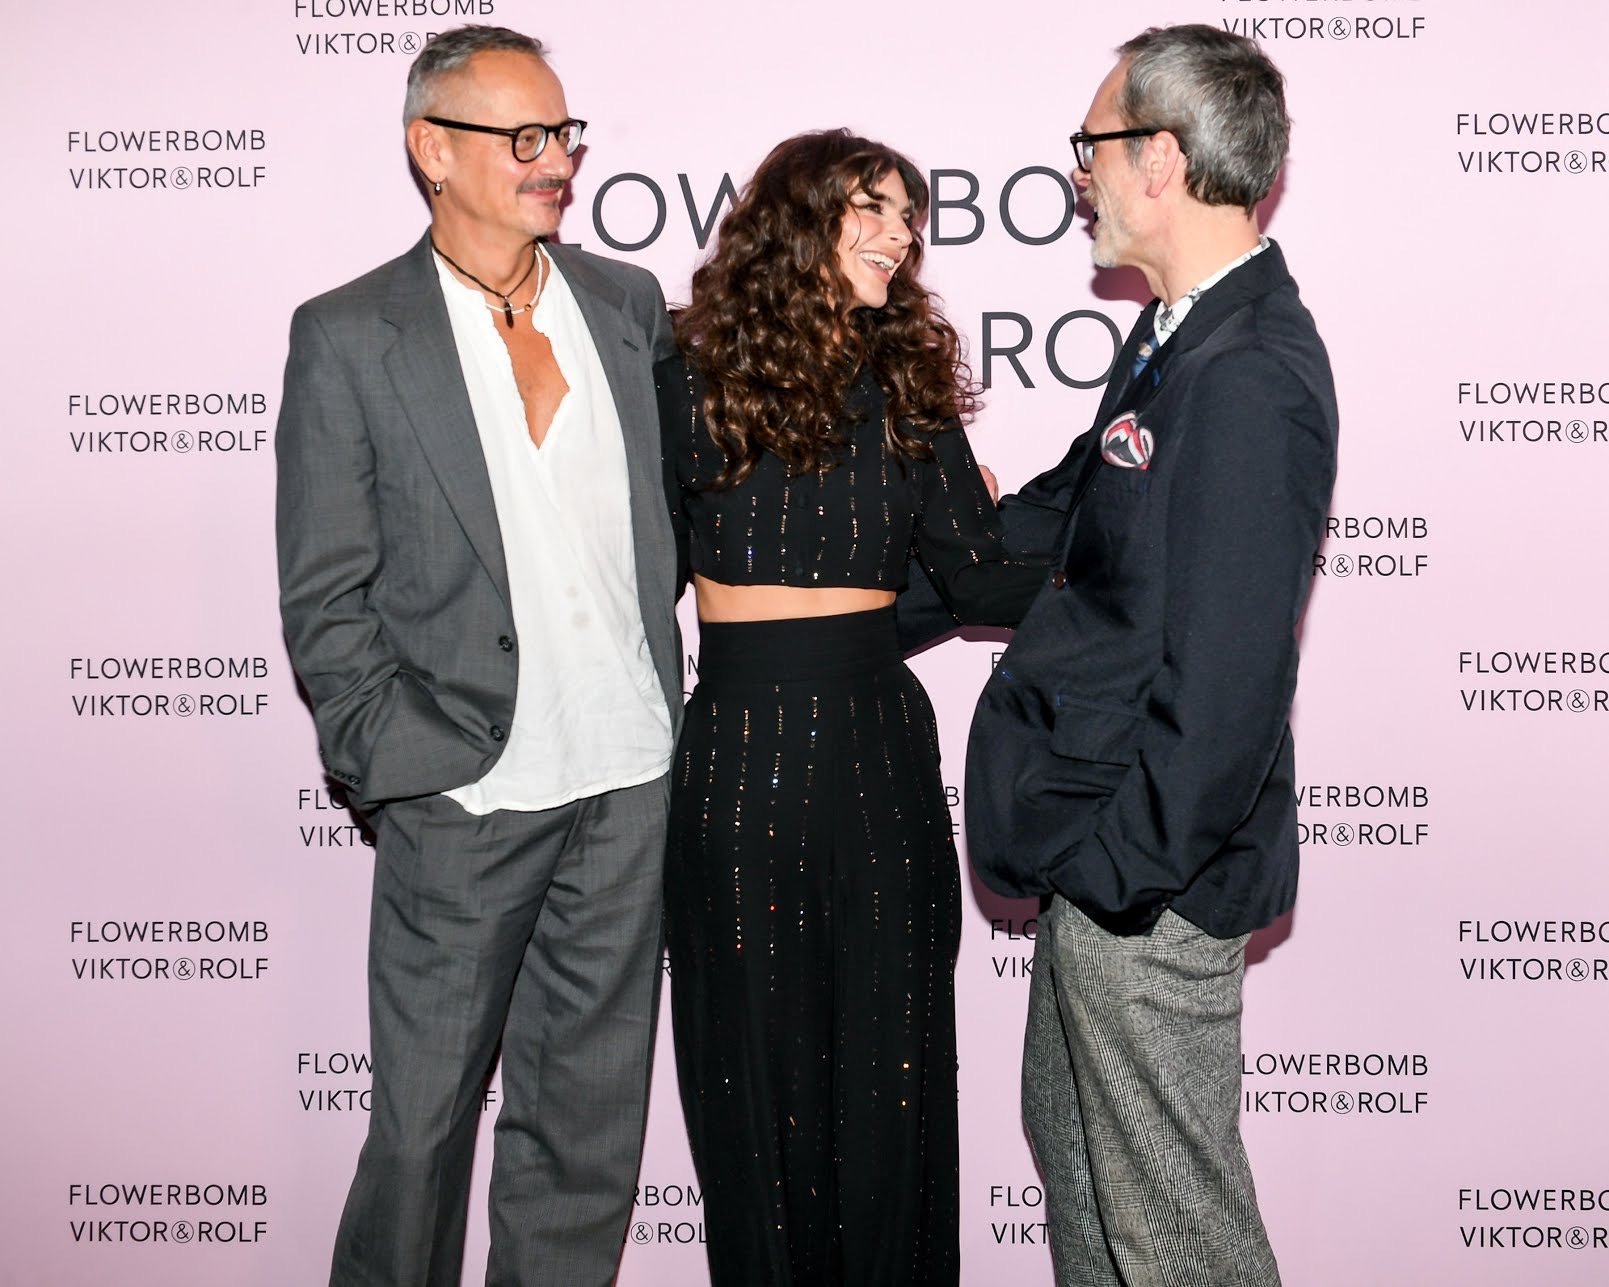 at VIKTOR&ROLF FLOWERBOMB HOLIDAY PARTY / id : 4572293 by BFA